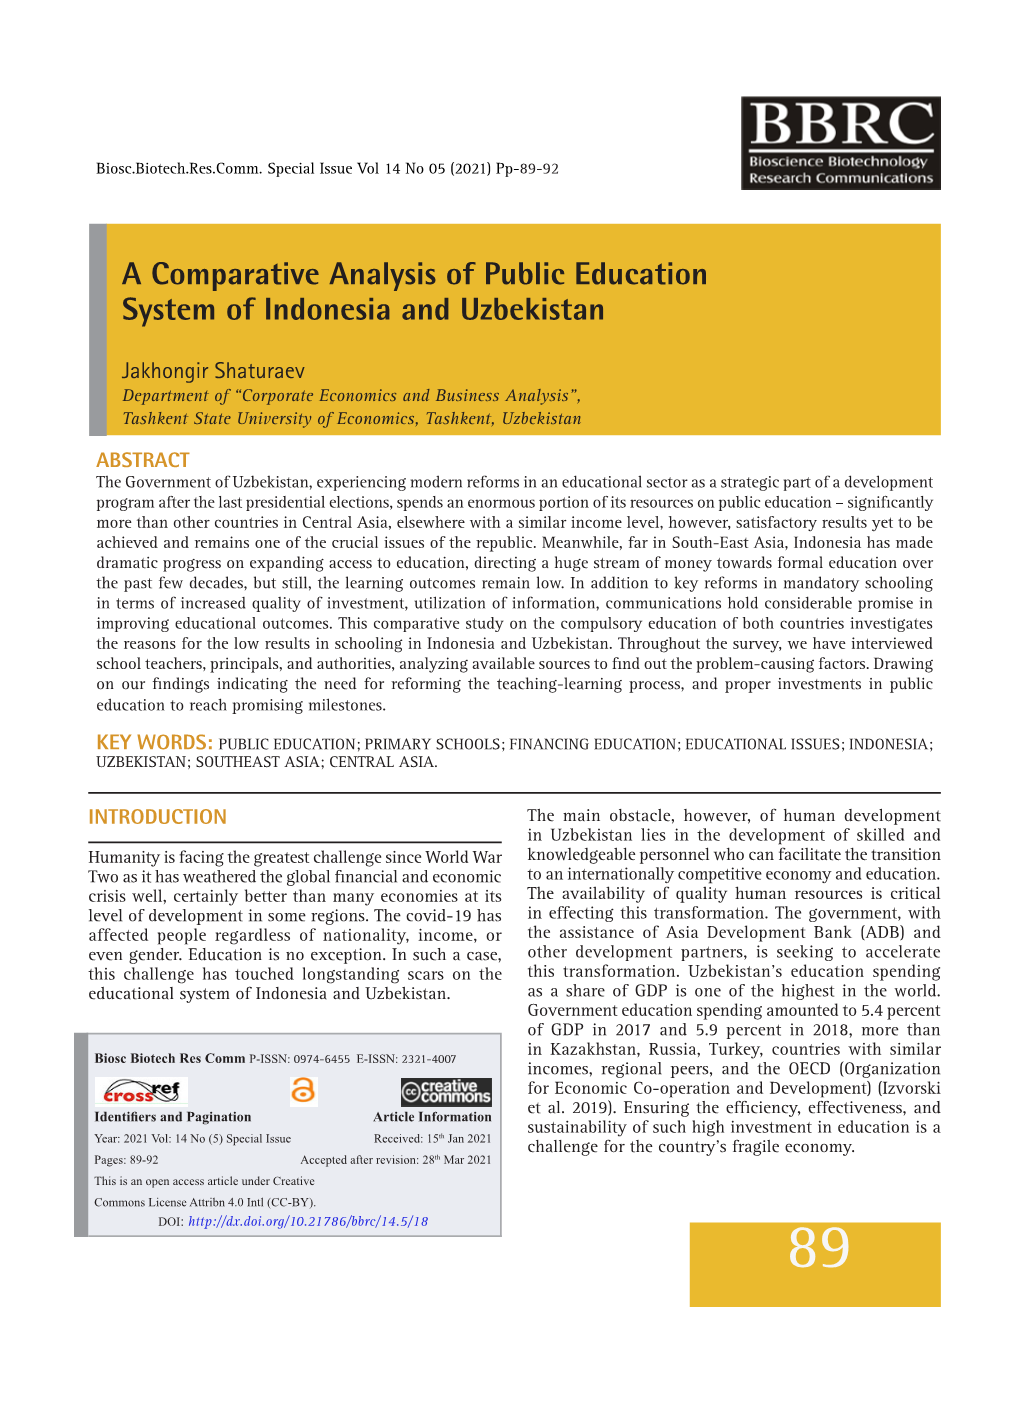 A Comparative Analysis of Public Education System of Indonesia and Uzbekistan